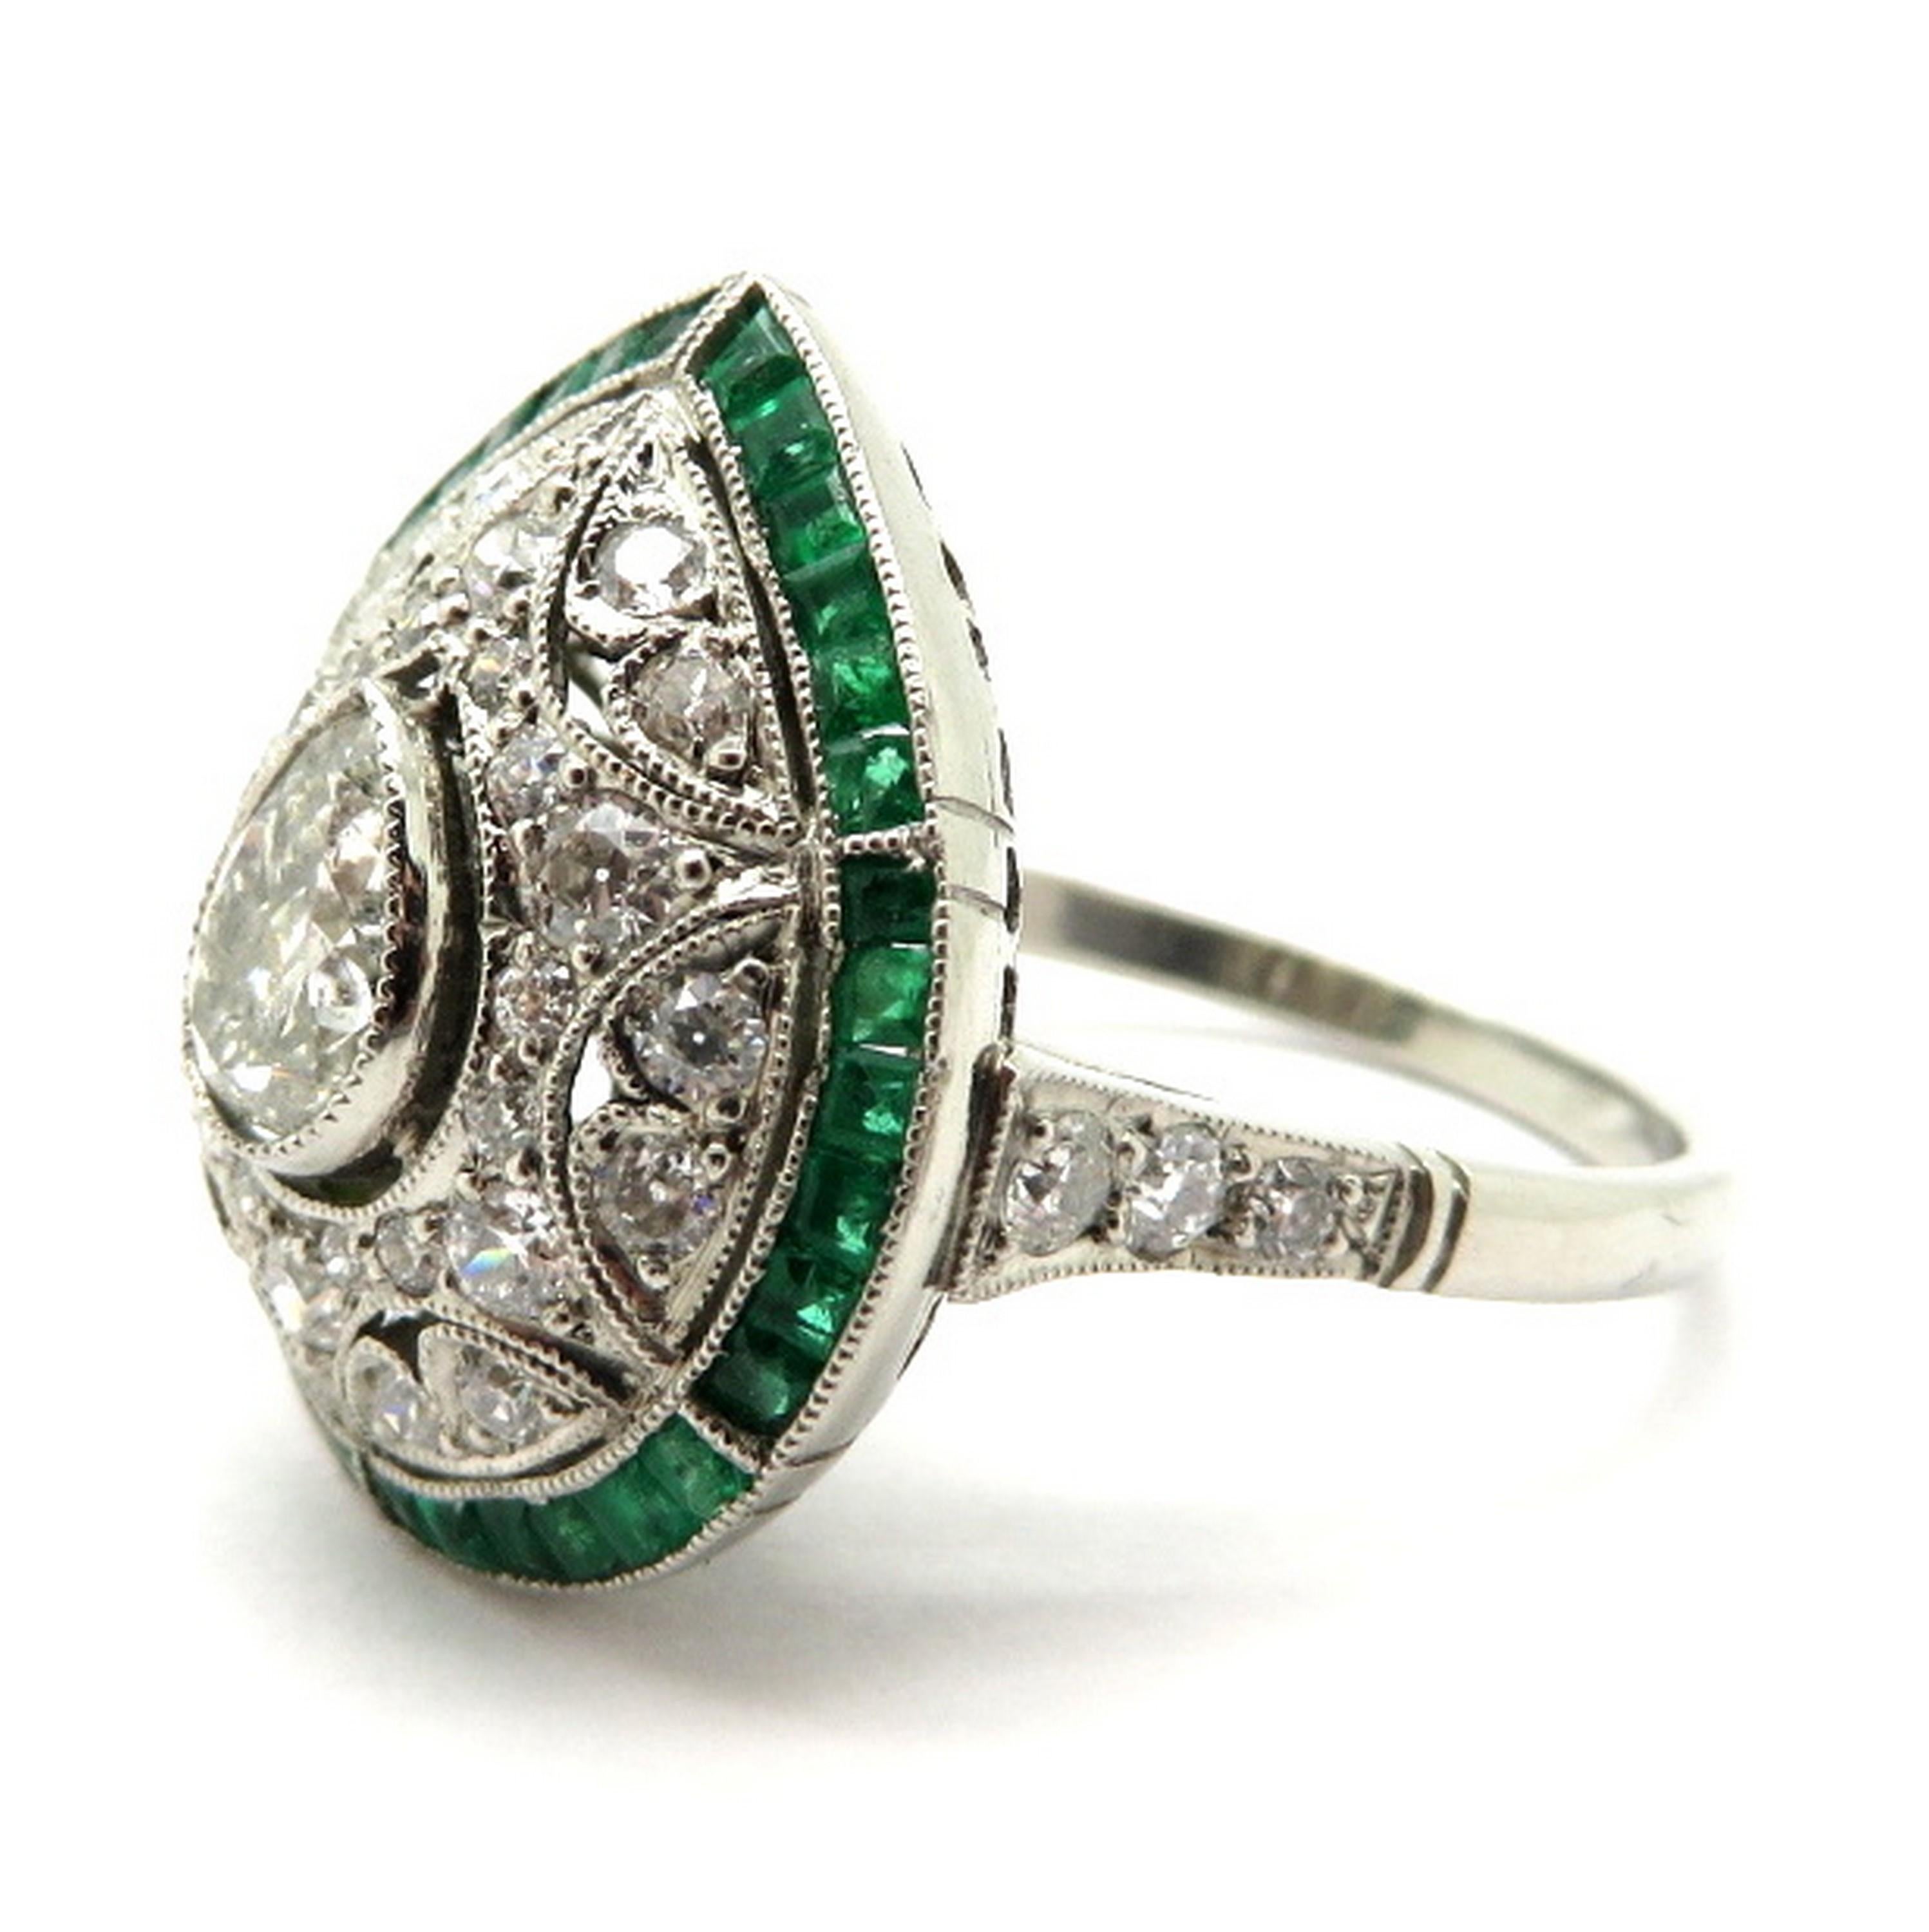 Platinum Art Deco style diamond and emerald engagement ring. Showcasing one pear brilliant cut diamond, milgrain bezel set, weighing approximately 0.58 carats. Diamond grading: color grade: I. Clarity grade: SI3. Accented with numerous Old European